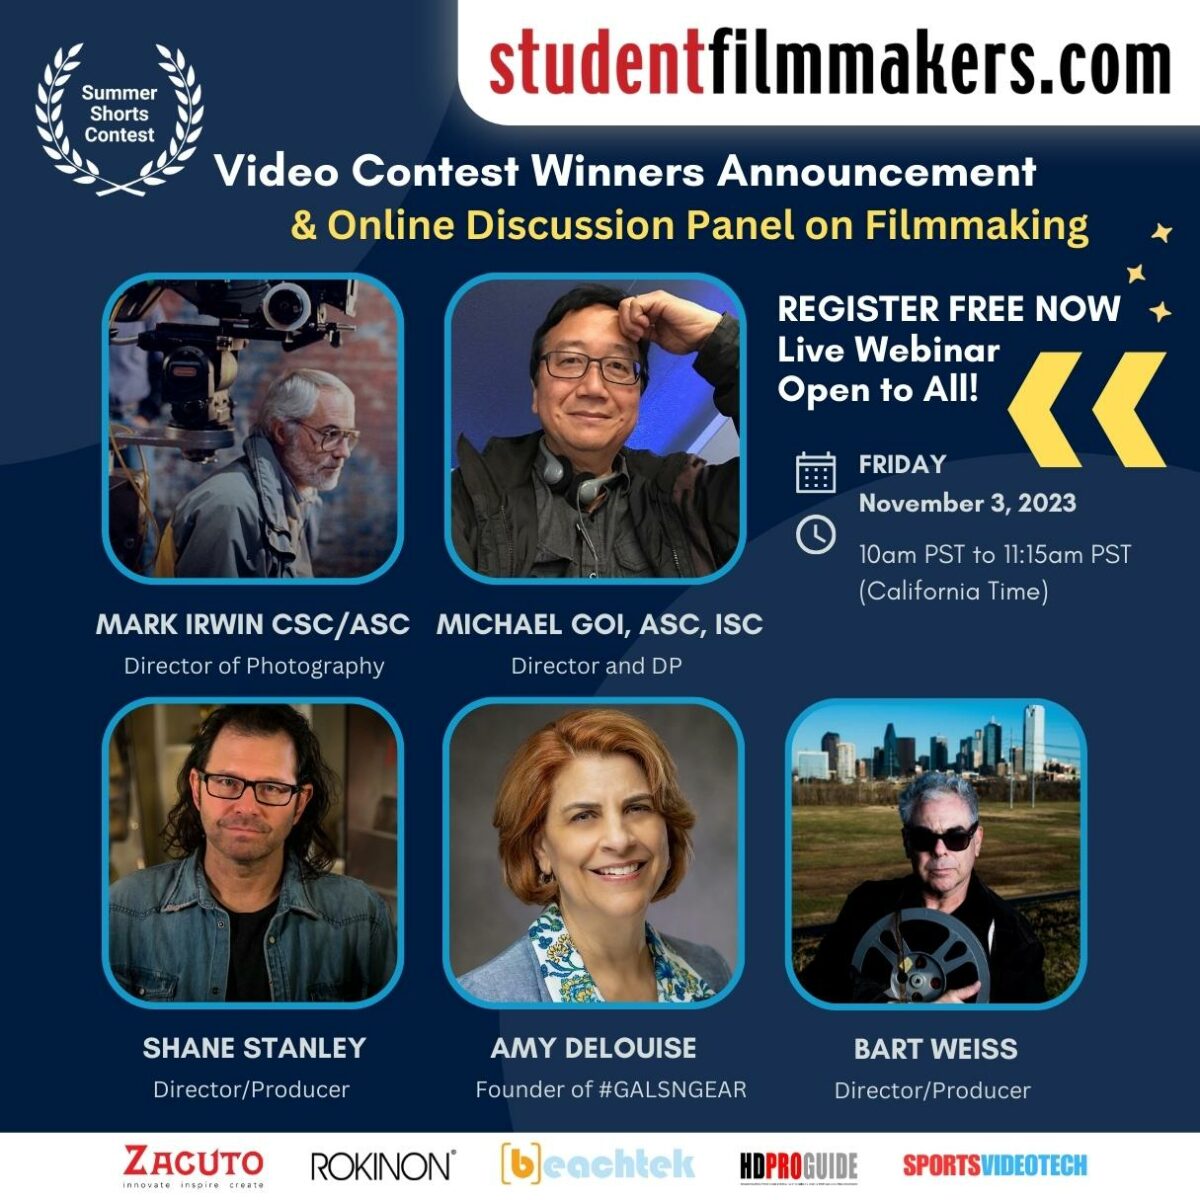 REGISTER FREE! LIVE WEBINAR | Online Discussion Panel with Michael Goi ASC, Mark Irwin CSC/ASC, Amy DeLouise, Shane Stanley & Bart Weiss; and "Summer Shorts Video Contest Winners Announcement" Hosted by StudentFilmmakers.com